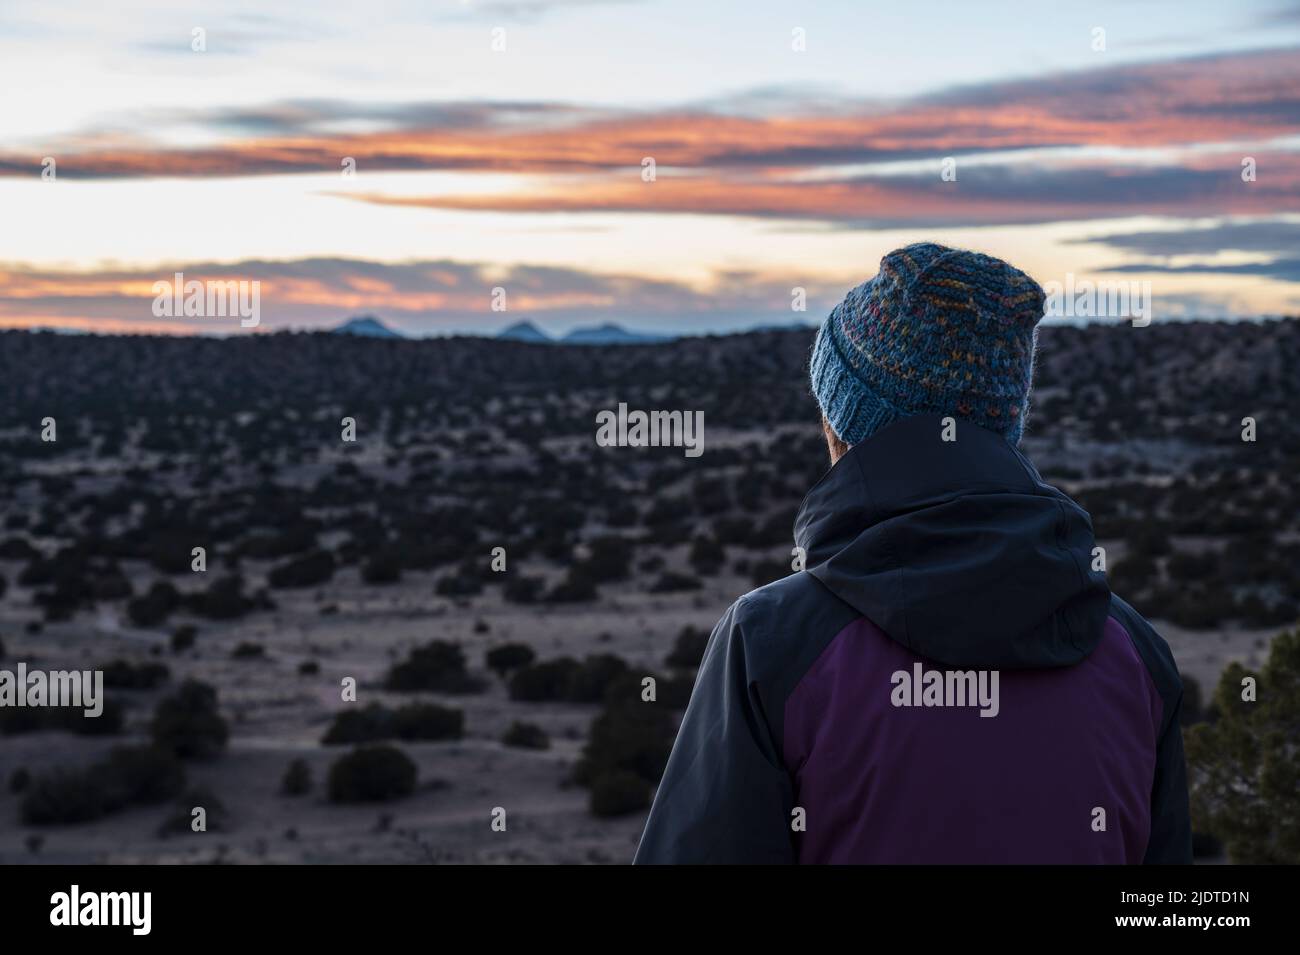 USA, New Mexico, Lamy, Rear view of woman in desert landscape at sunset in Galisteo Basin Preserve Stock Photo